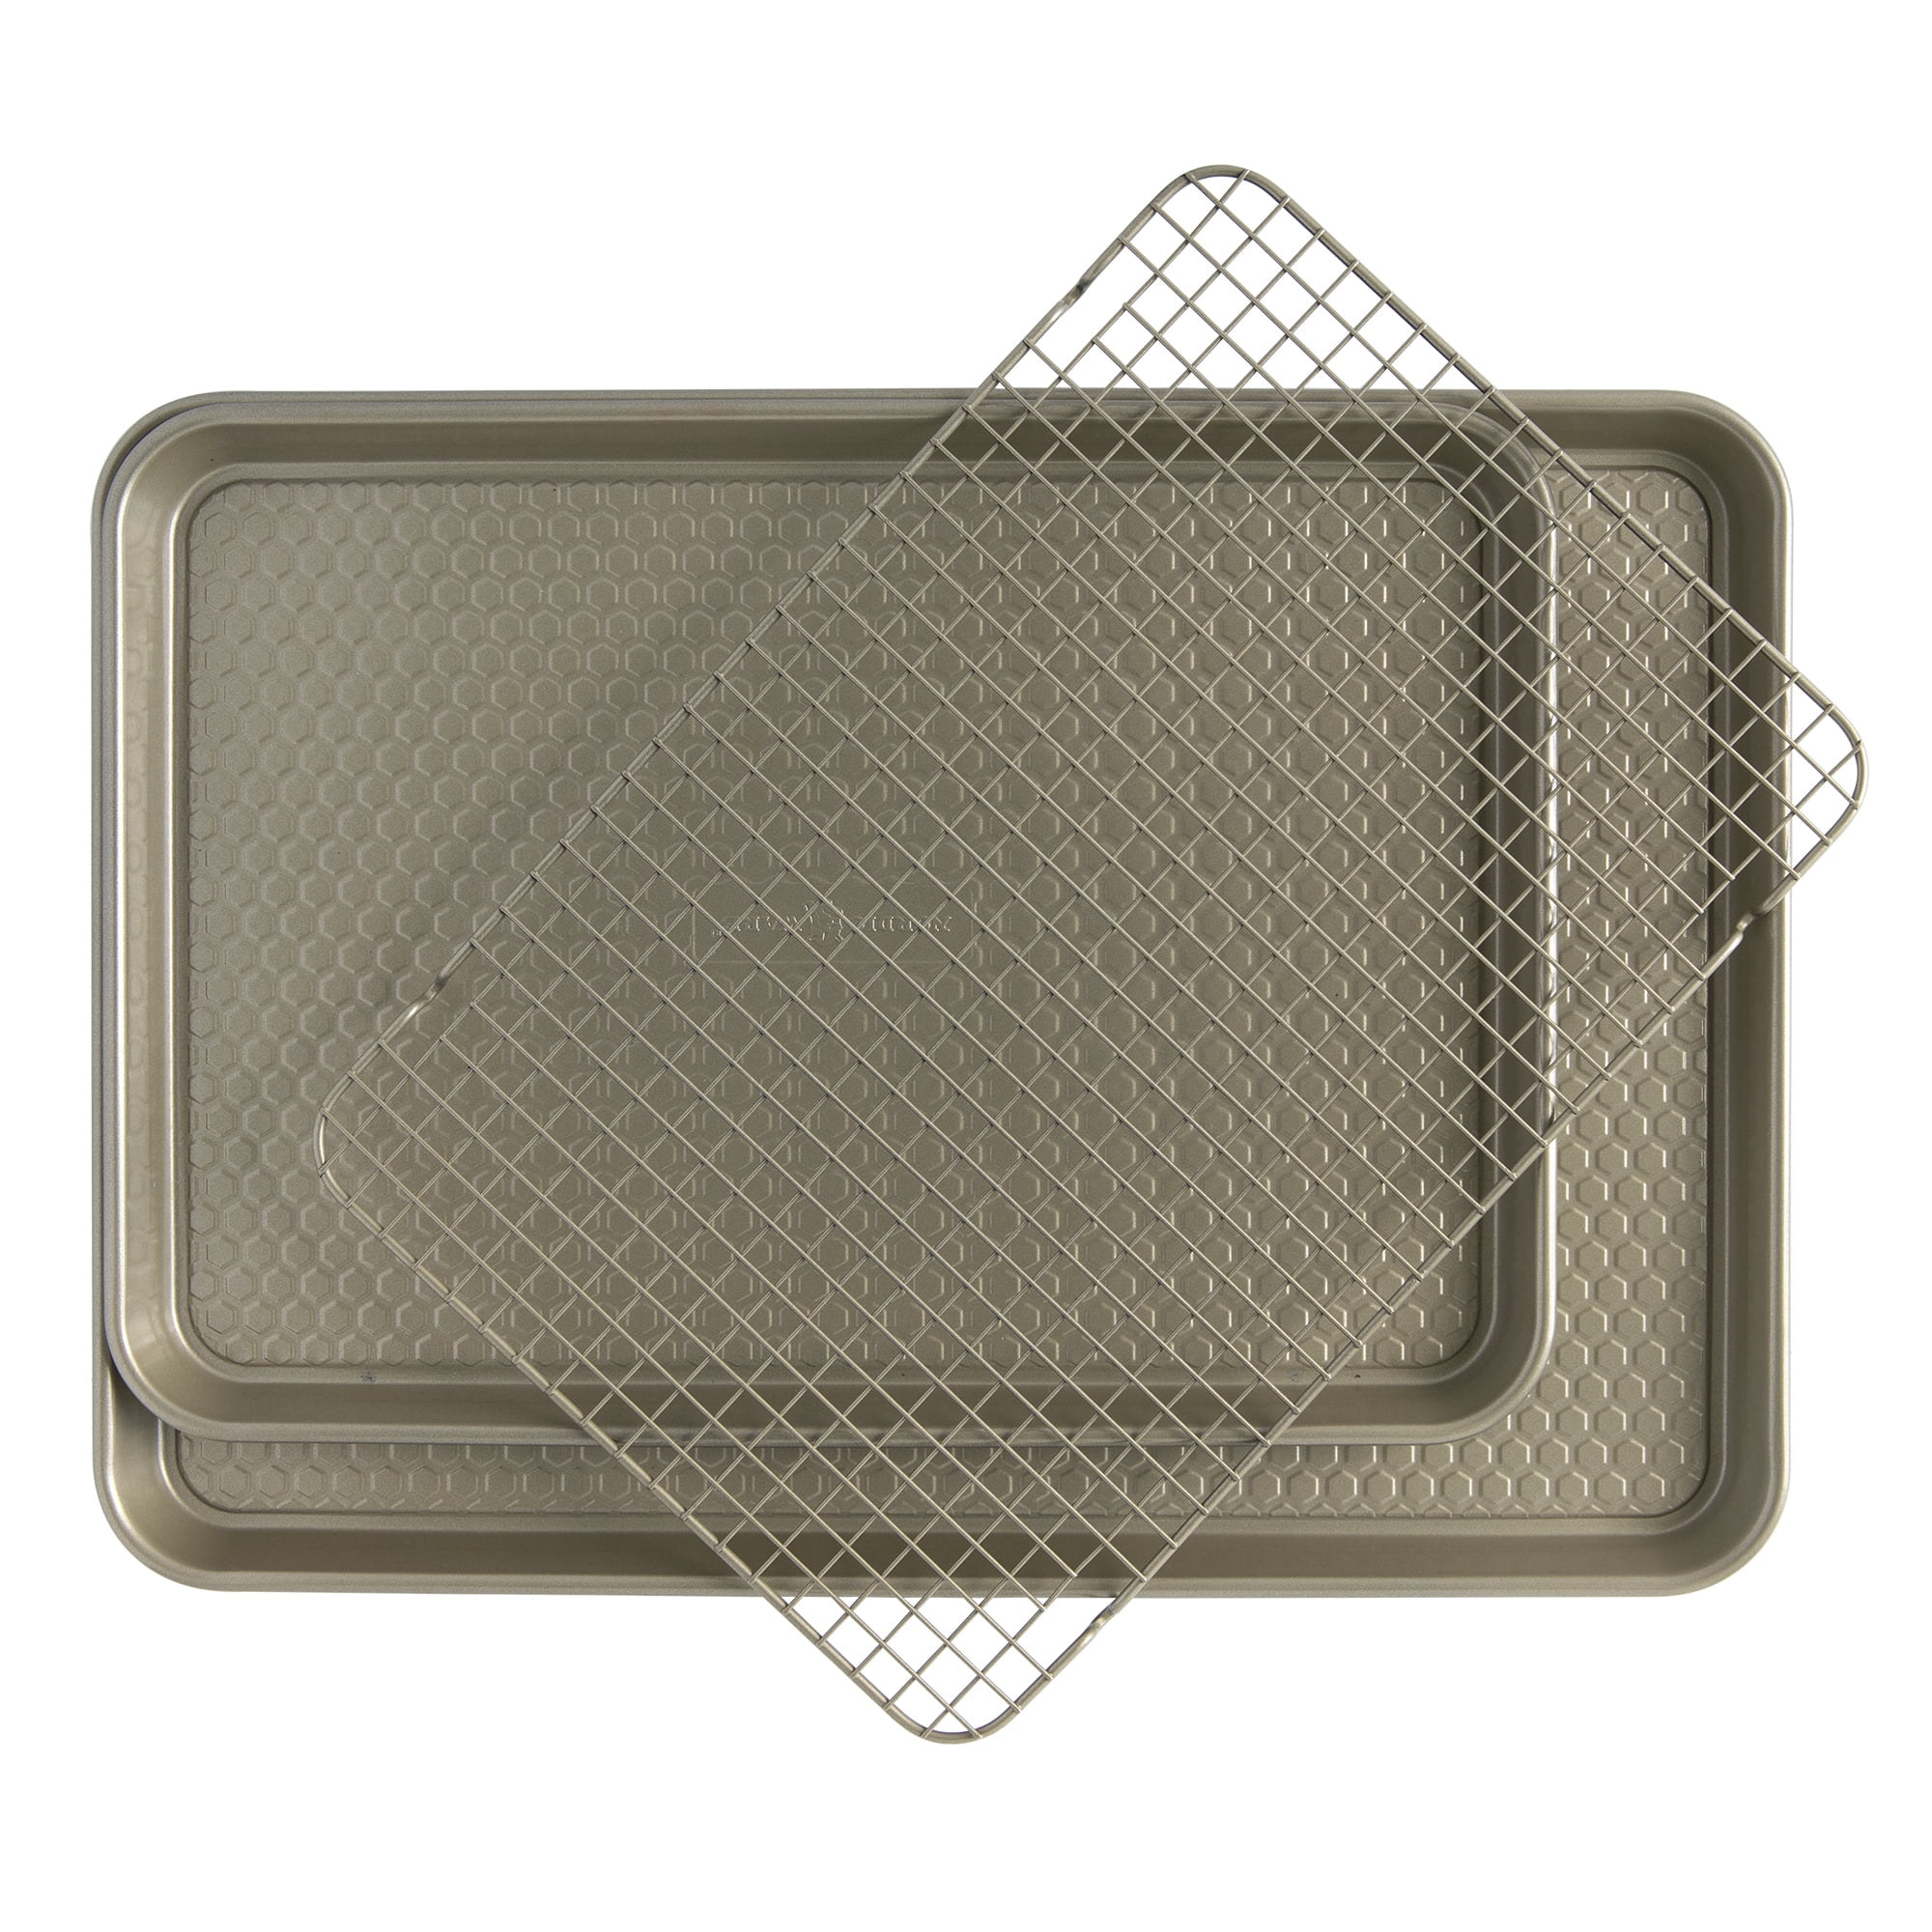 Nordic Ware 10081SM 3 Piece Nonstick Baking Sheet and Cooling Rack